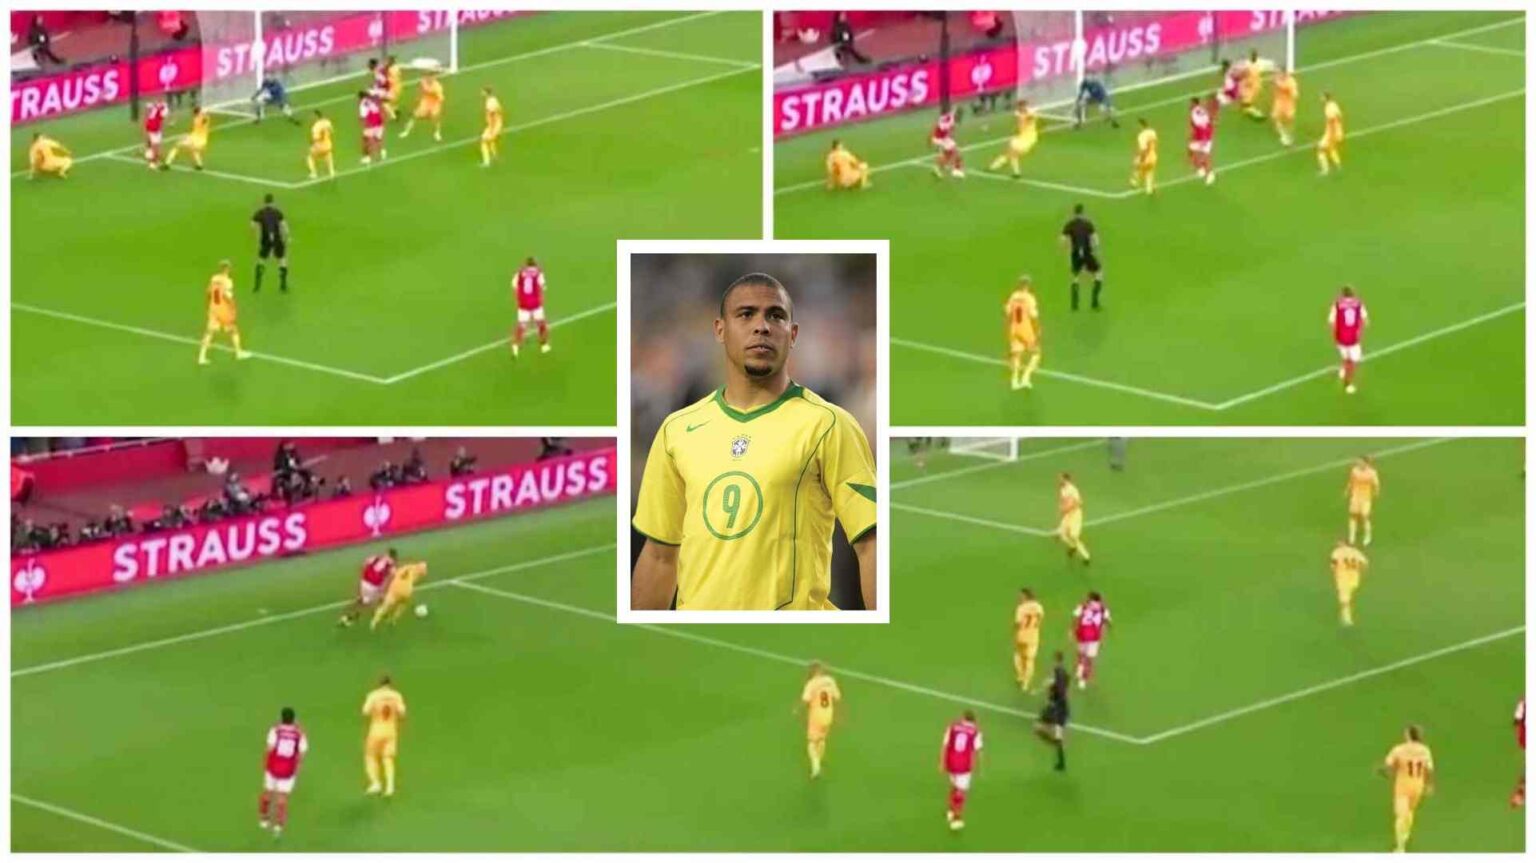 Watch: Fans believe Gabriel Jesus is the new 'Ronaldo Nazário' after dribbling past Bodo-Glimt defenders as if they didn't exist